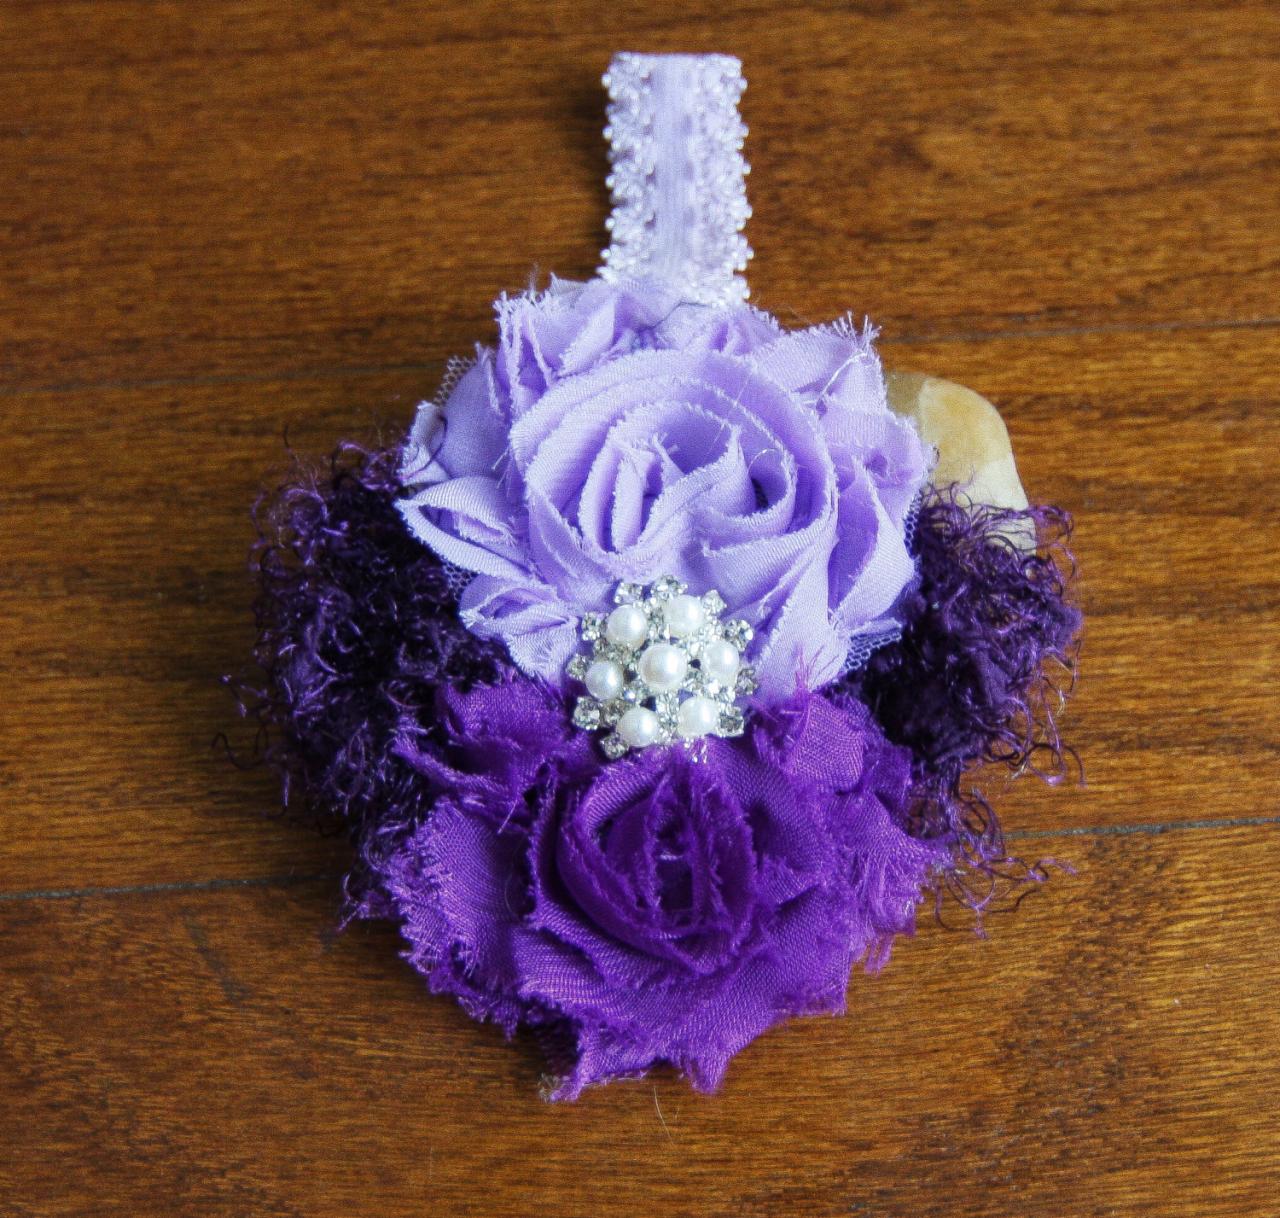 Headband-halo-- Lavendar & Lace! This Hair Accessory Is So Girly!